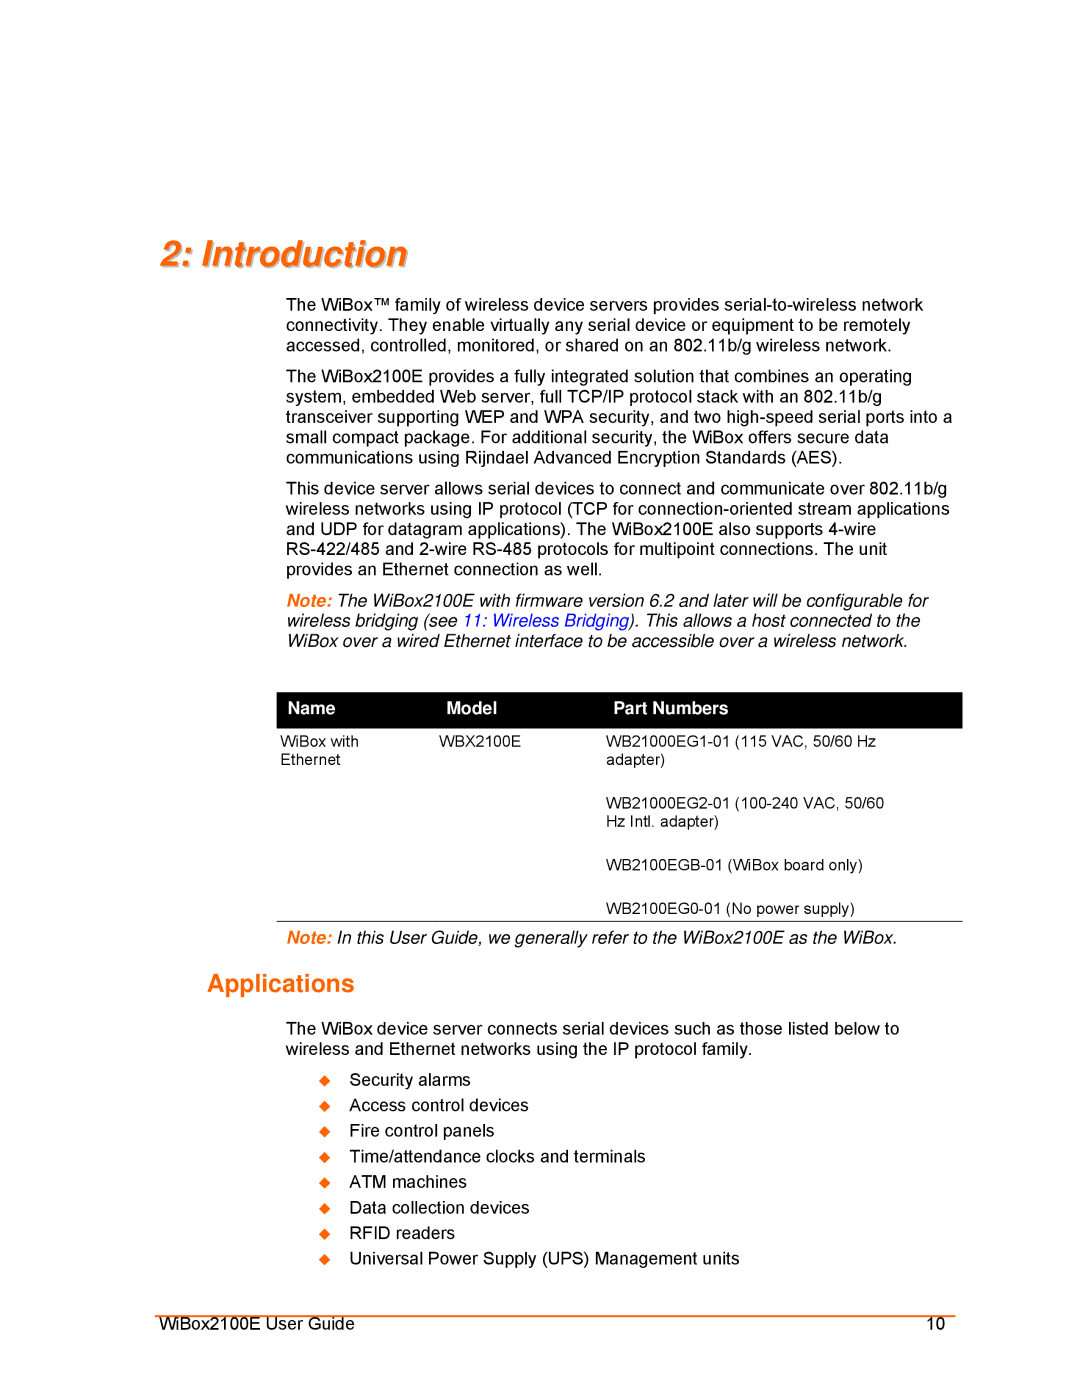 Lantronix Ethernet manual Introduction, Applications, Name Model Part Numbers 